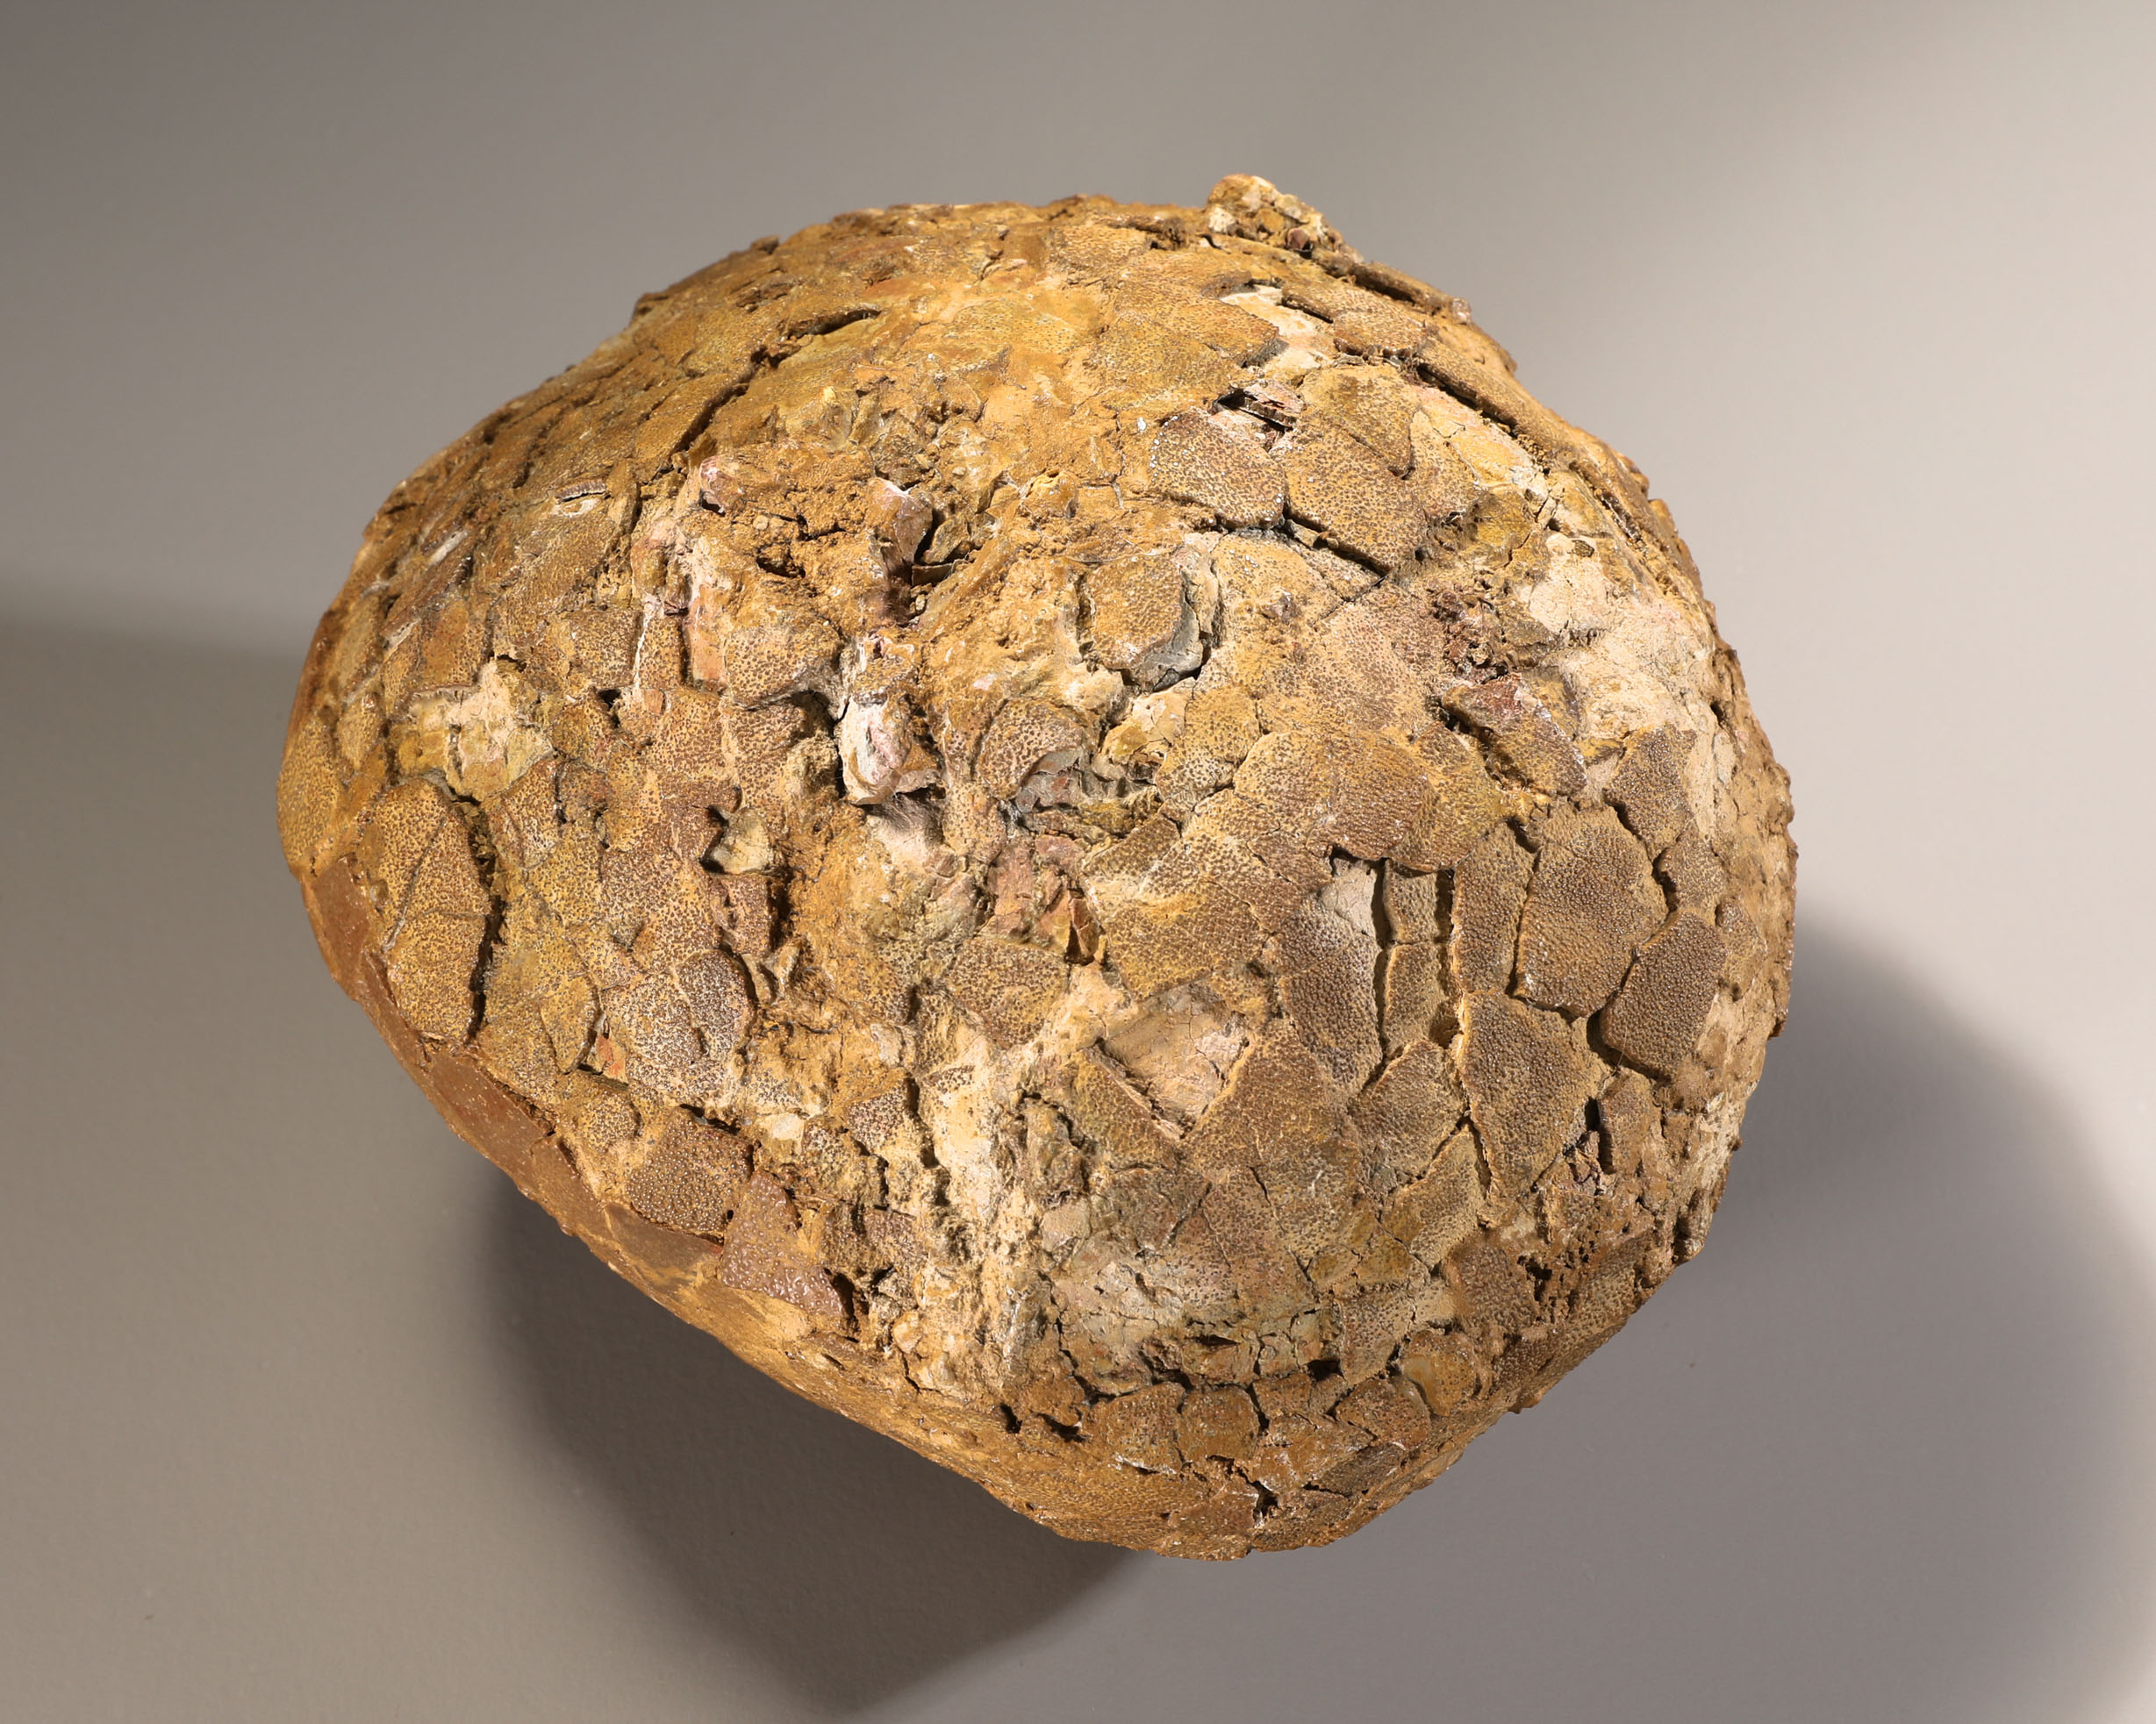 Fossilized dinosaur egg attributed to Hypselosaurus Priscus, France - Image 4 of 4